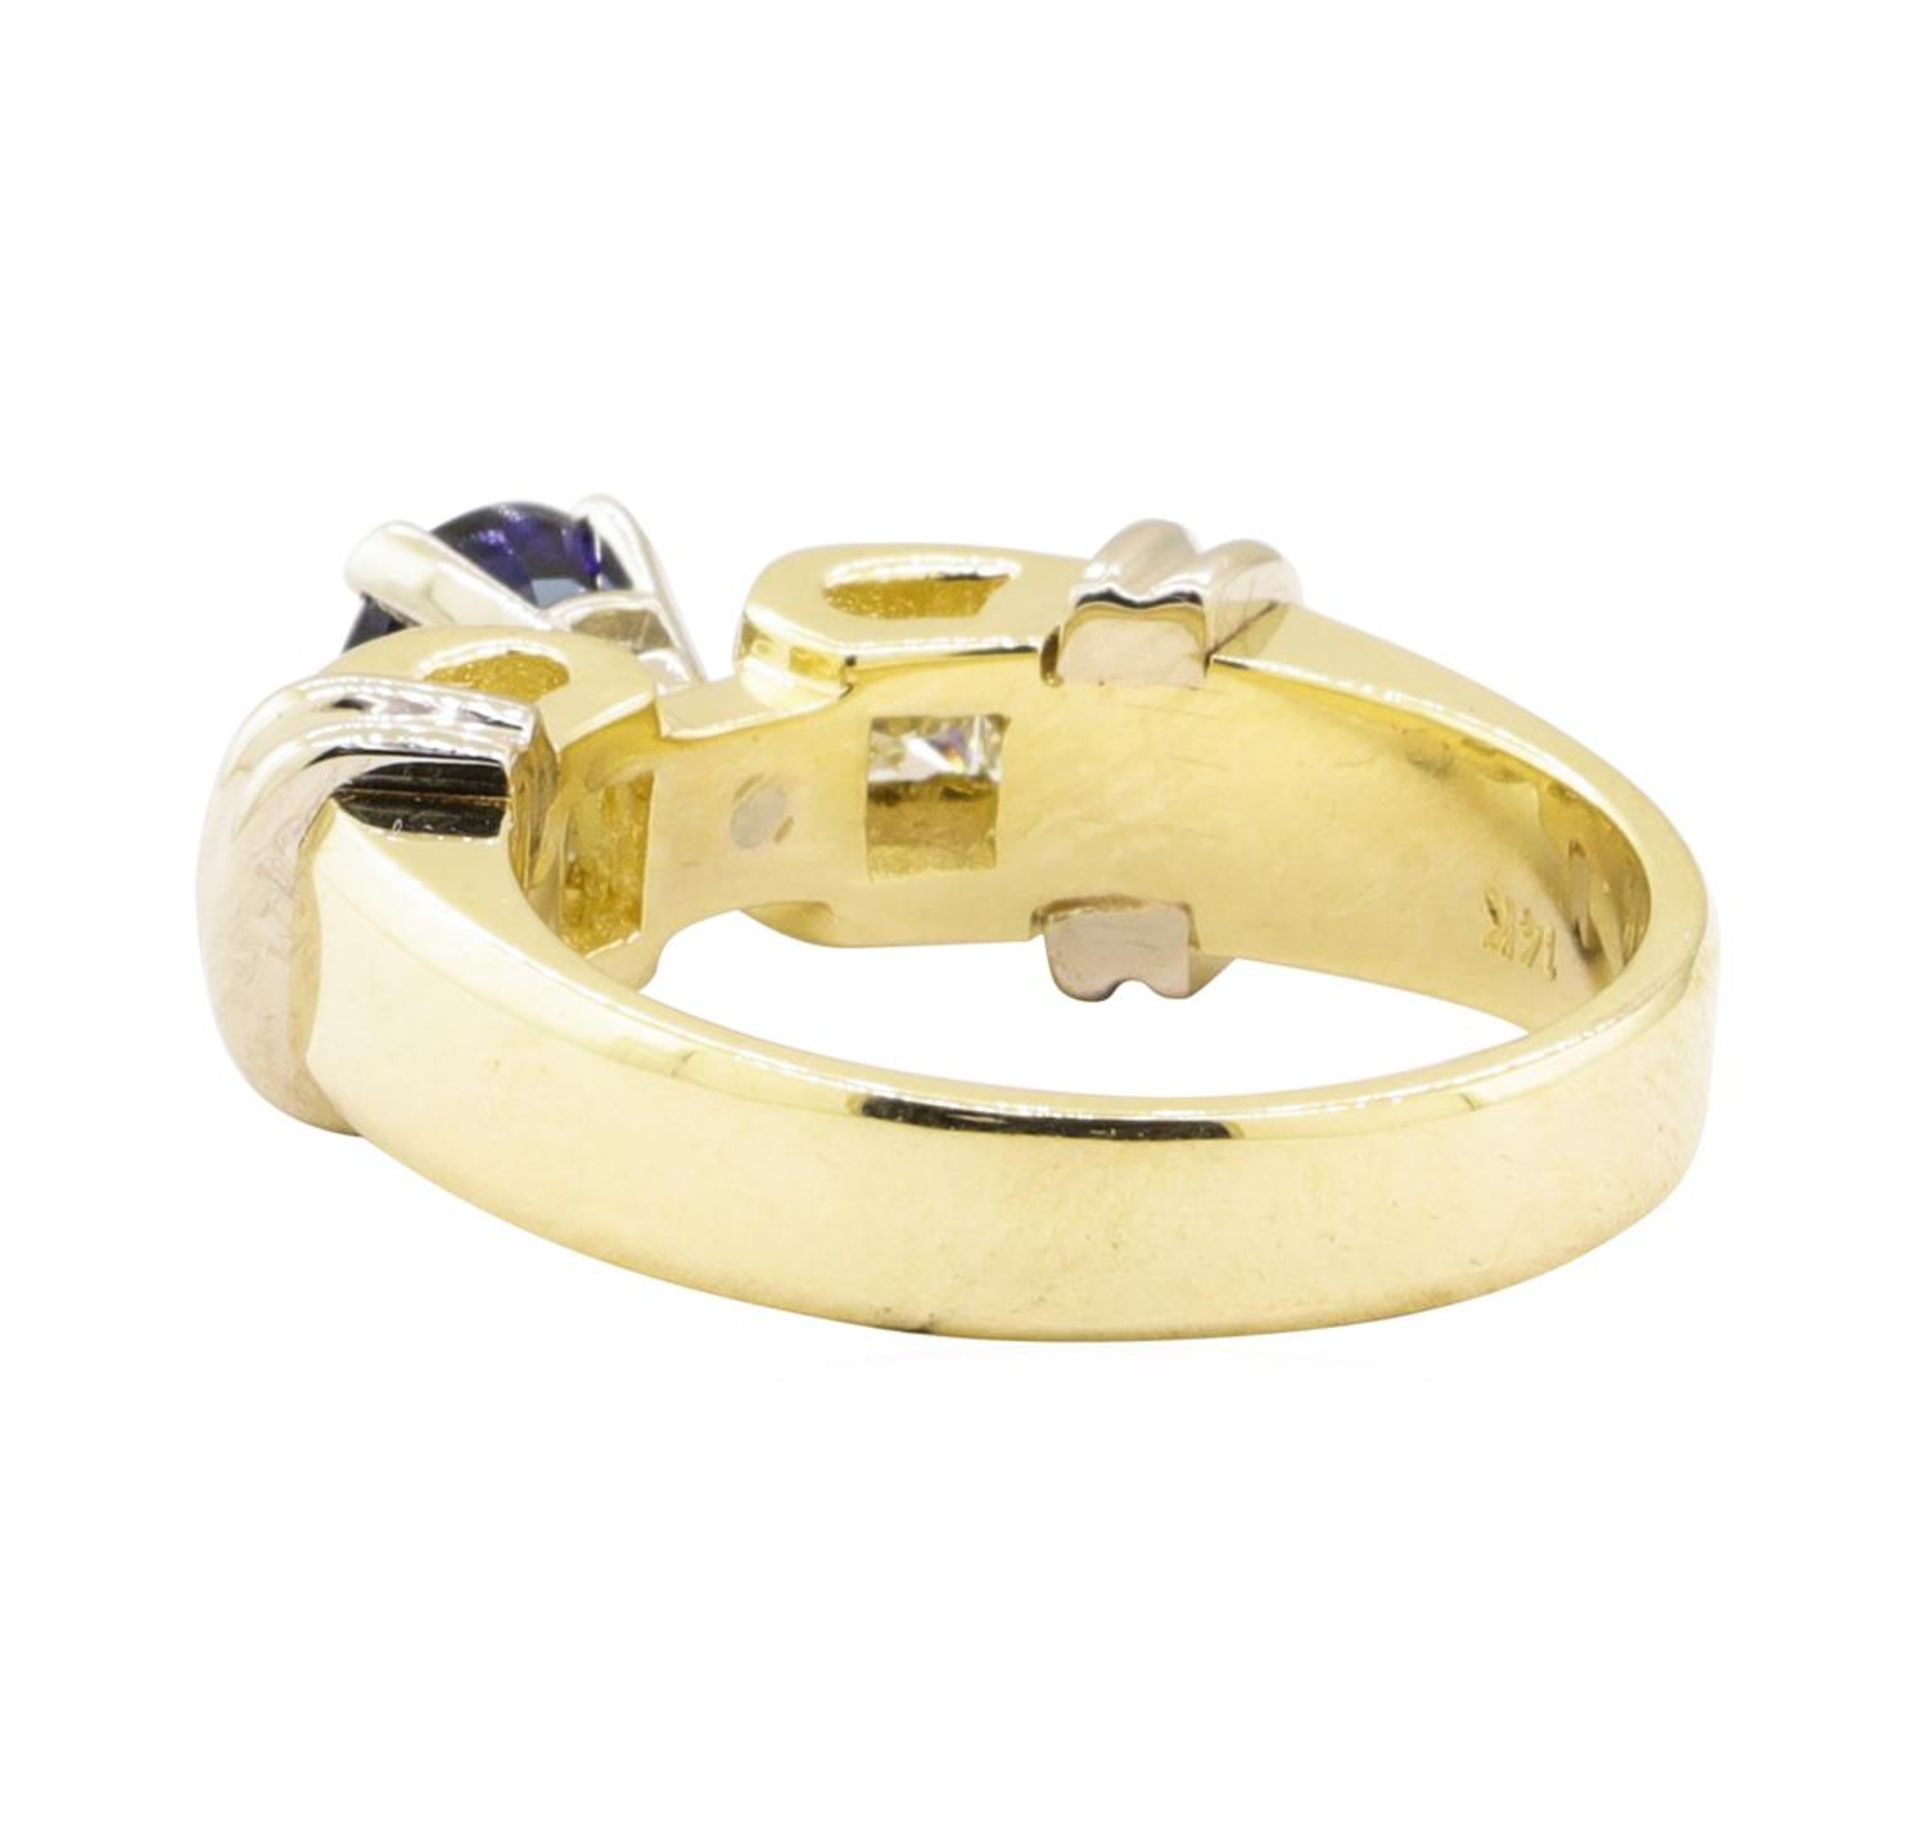 1.67 ctw Blue Sapphire And Diamond Ring - 14KT Yellow And White Gold - Image 3 of 5